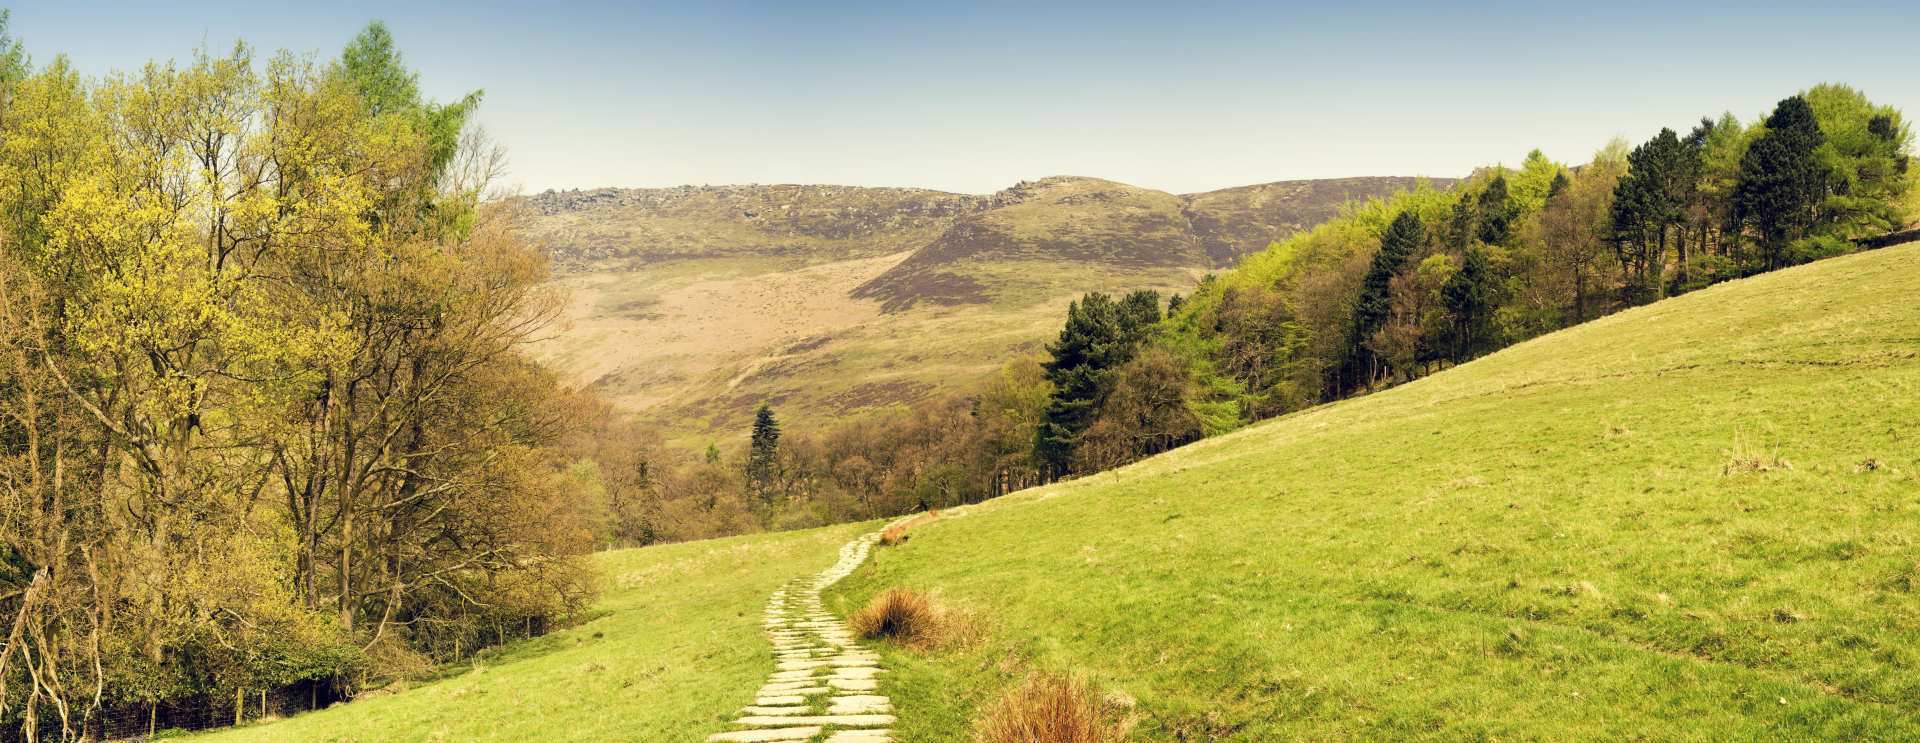 Pennine Way Trail Running - South Section